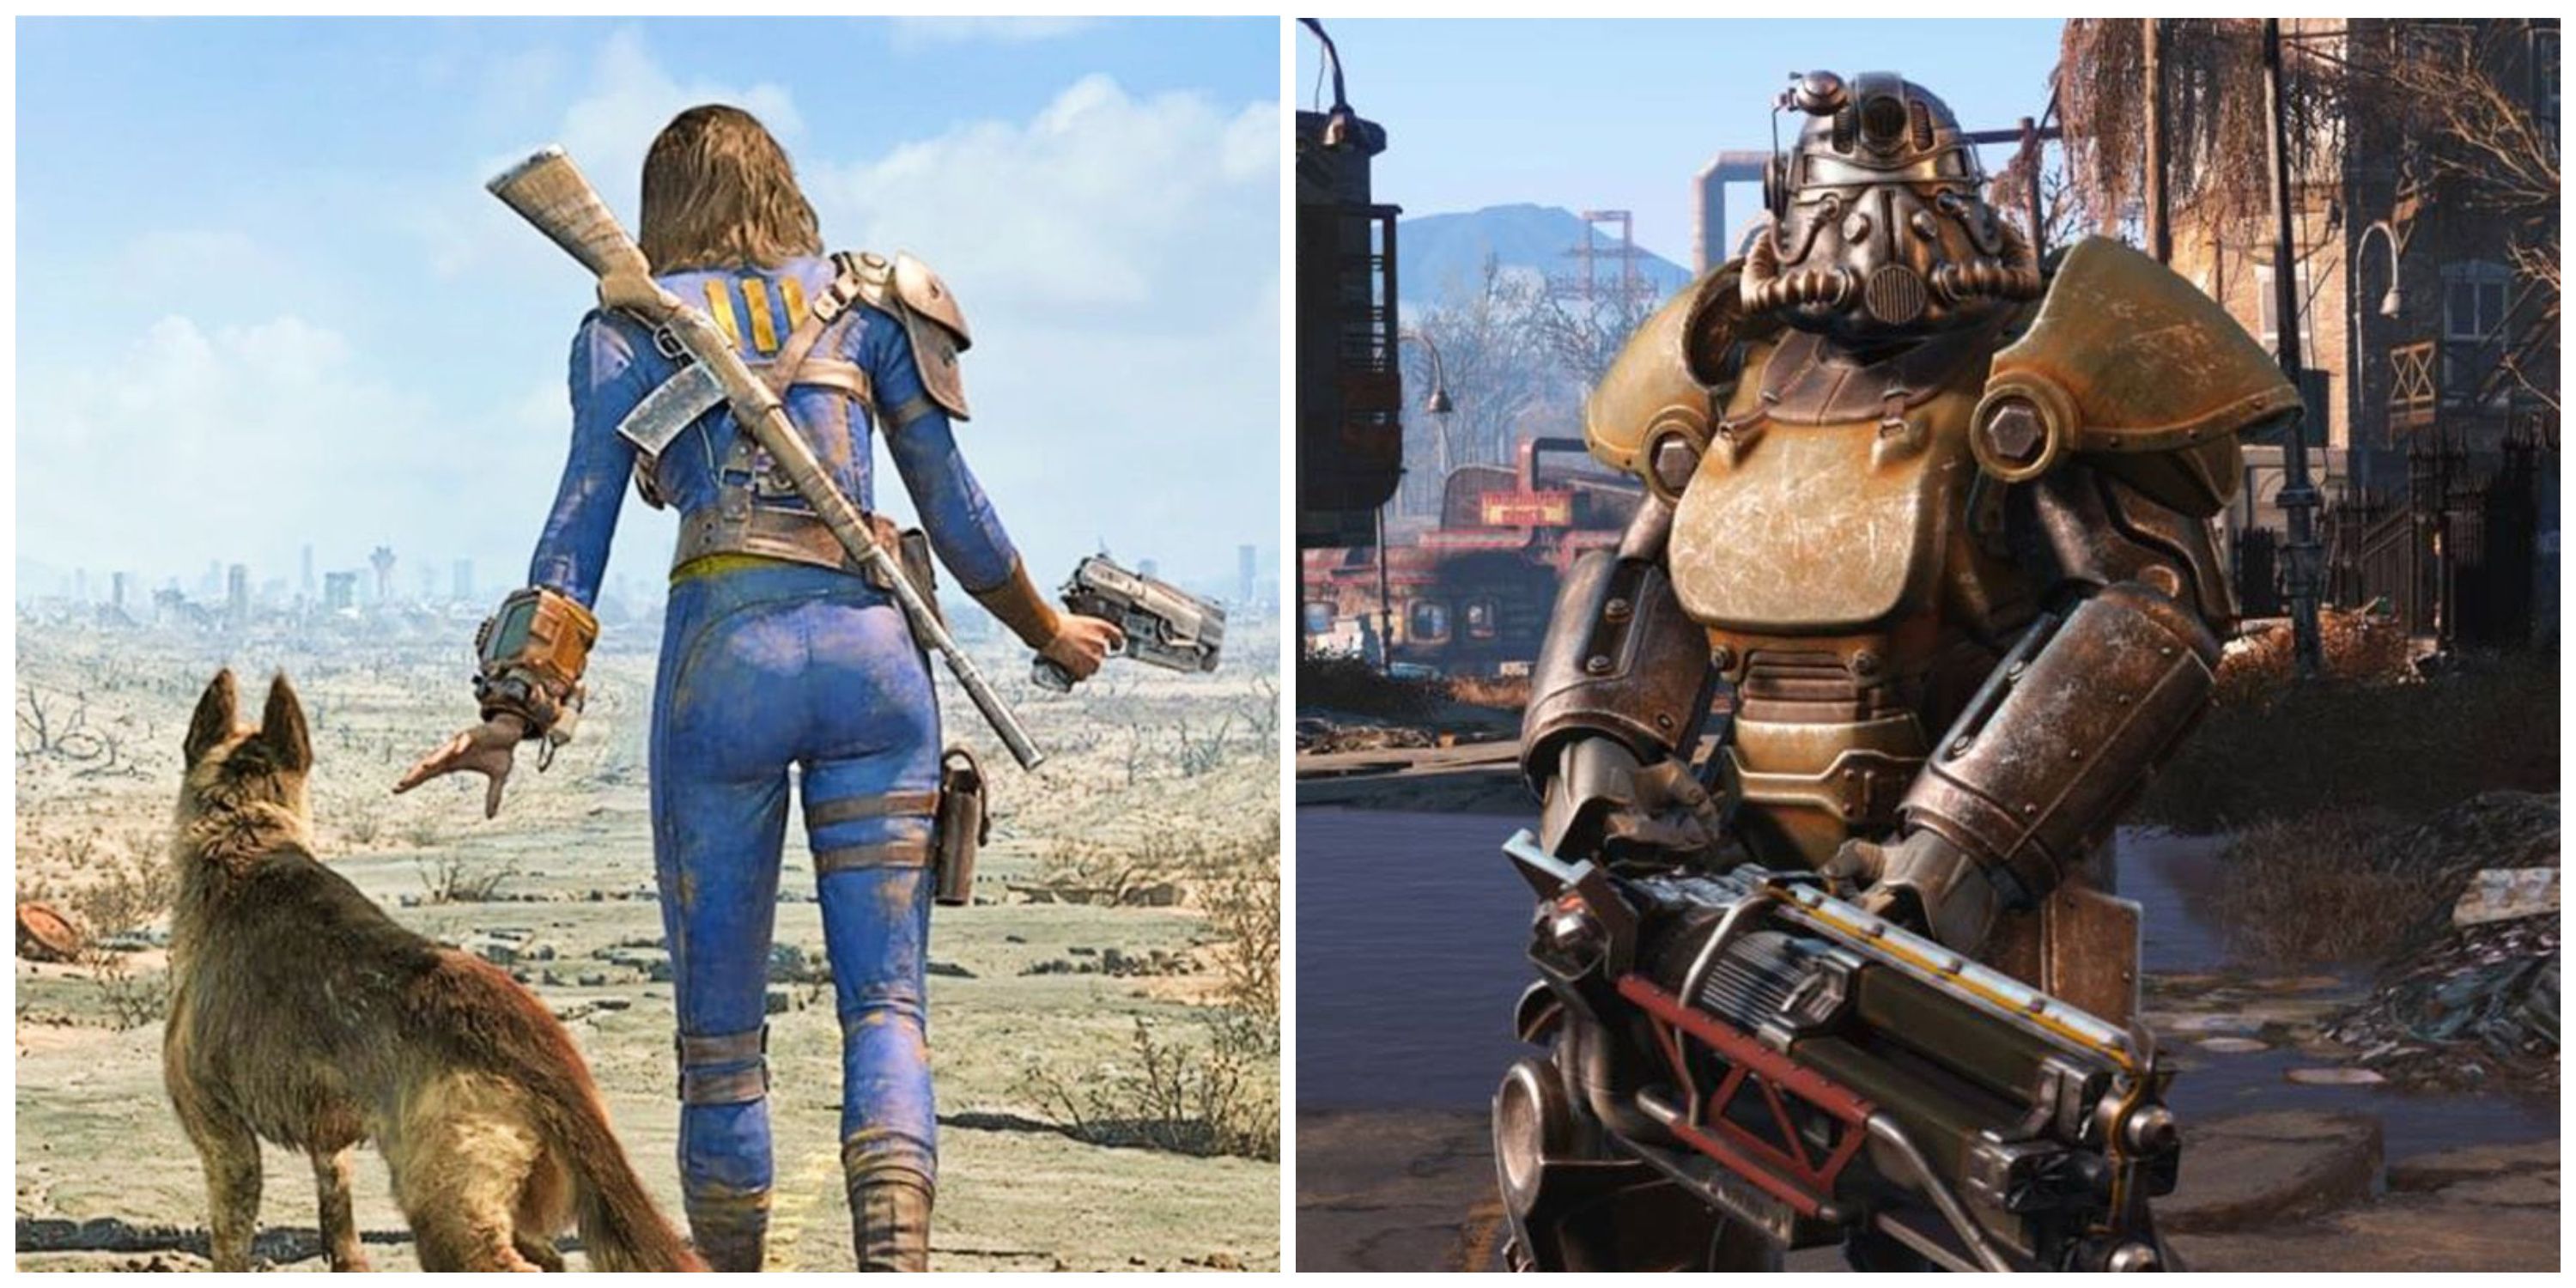 Fallout 4: Things Have Aged Well